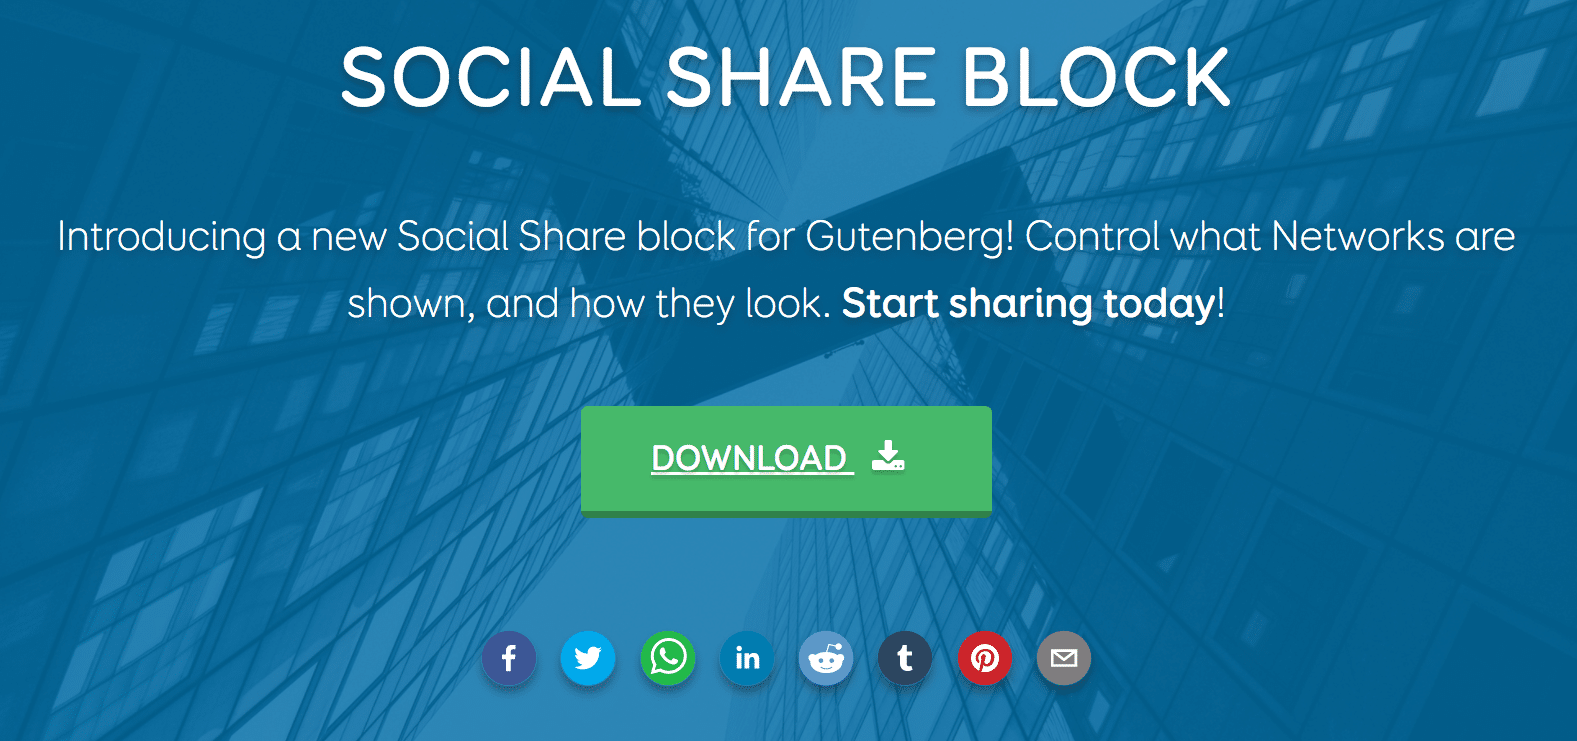 The words "Social Share Block" over a blue background